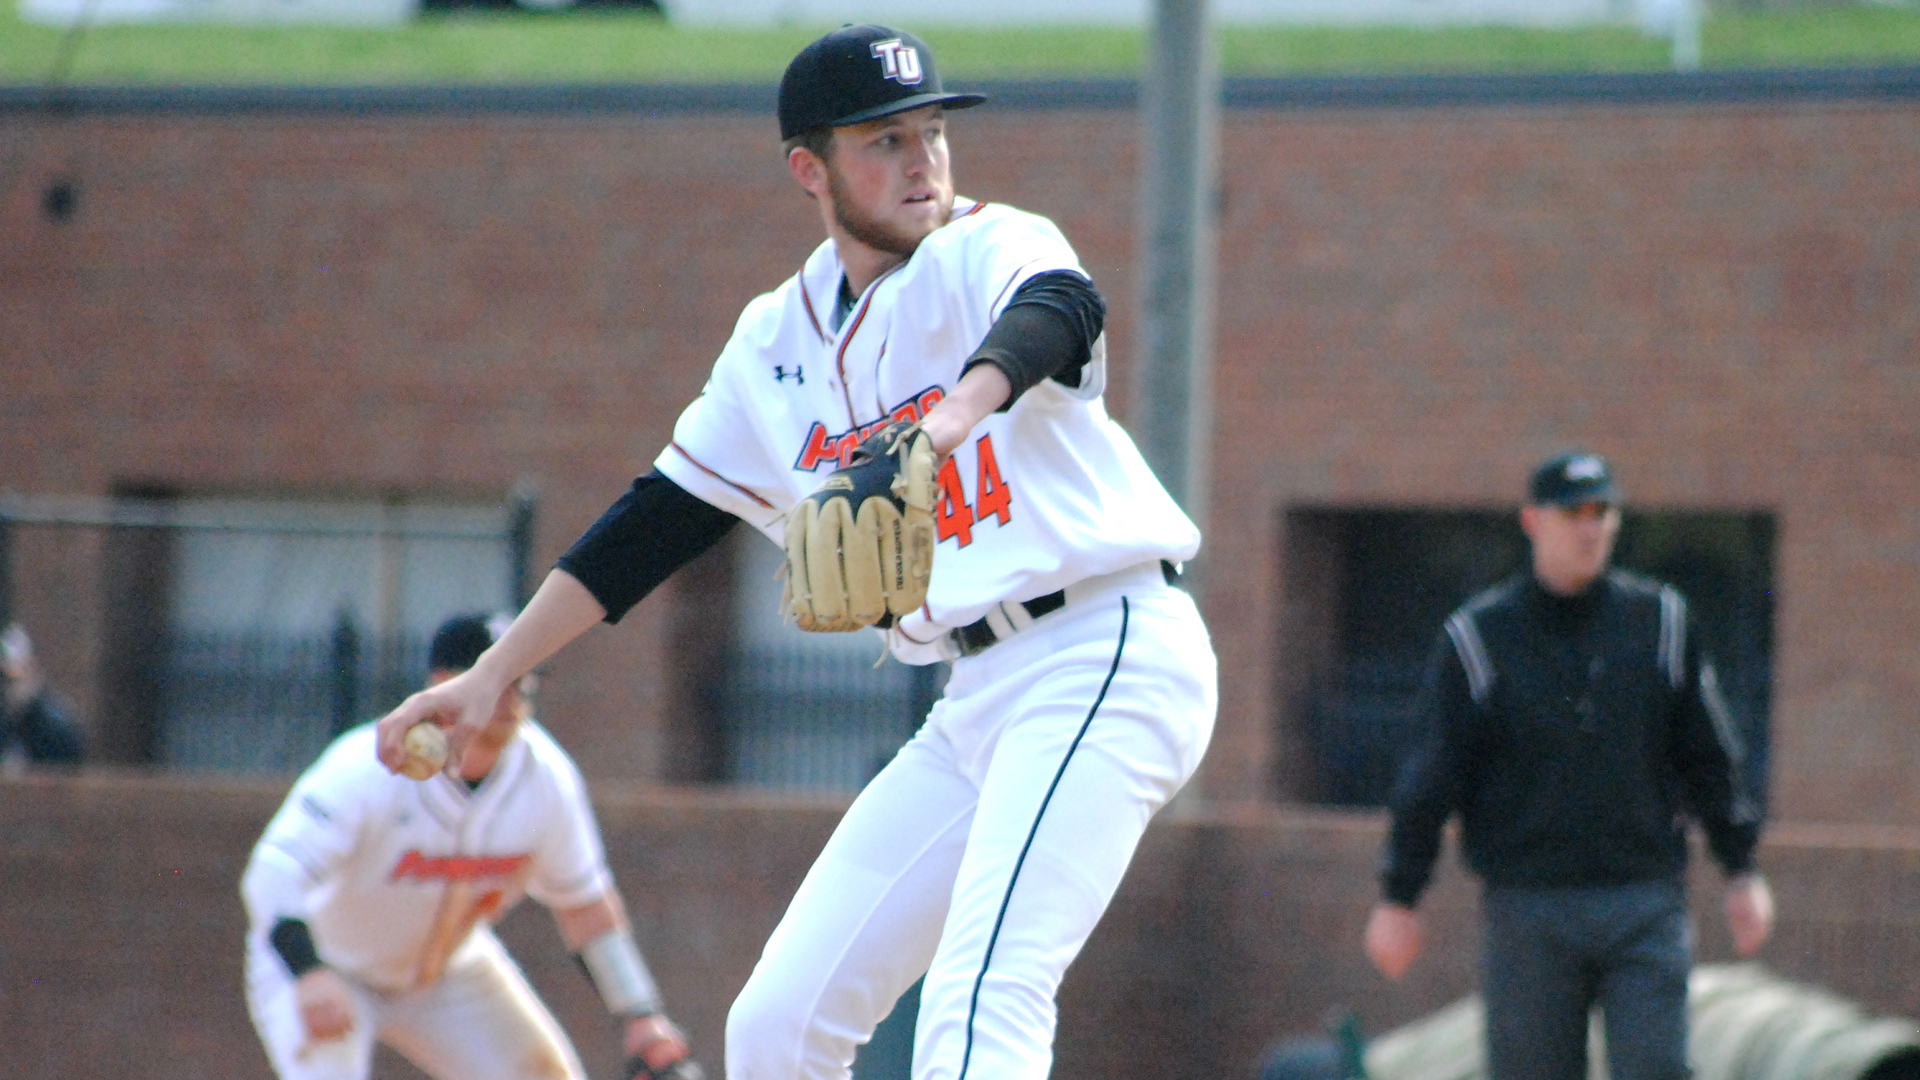 Dawson Gause pitched 3 perfect innings in Tusculum's 10-3 loss to No. 5 Catawba (photo by Steve Lloyd)